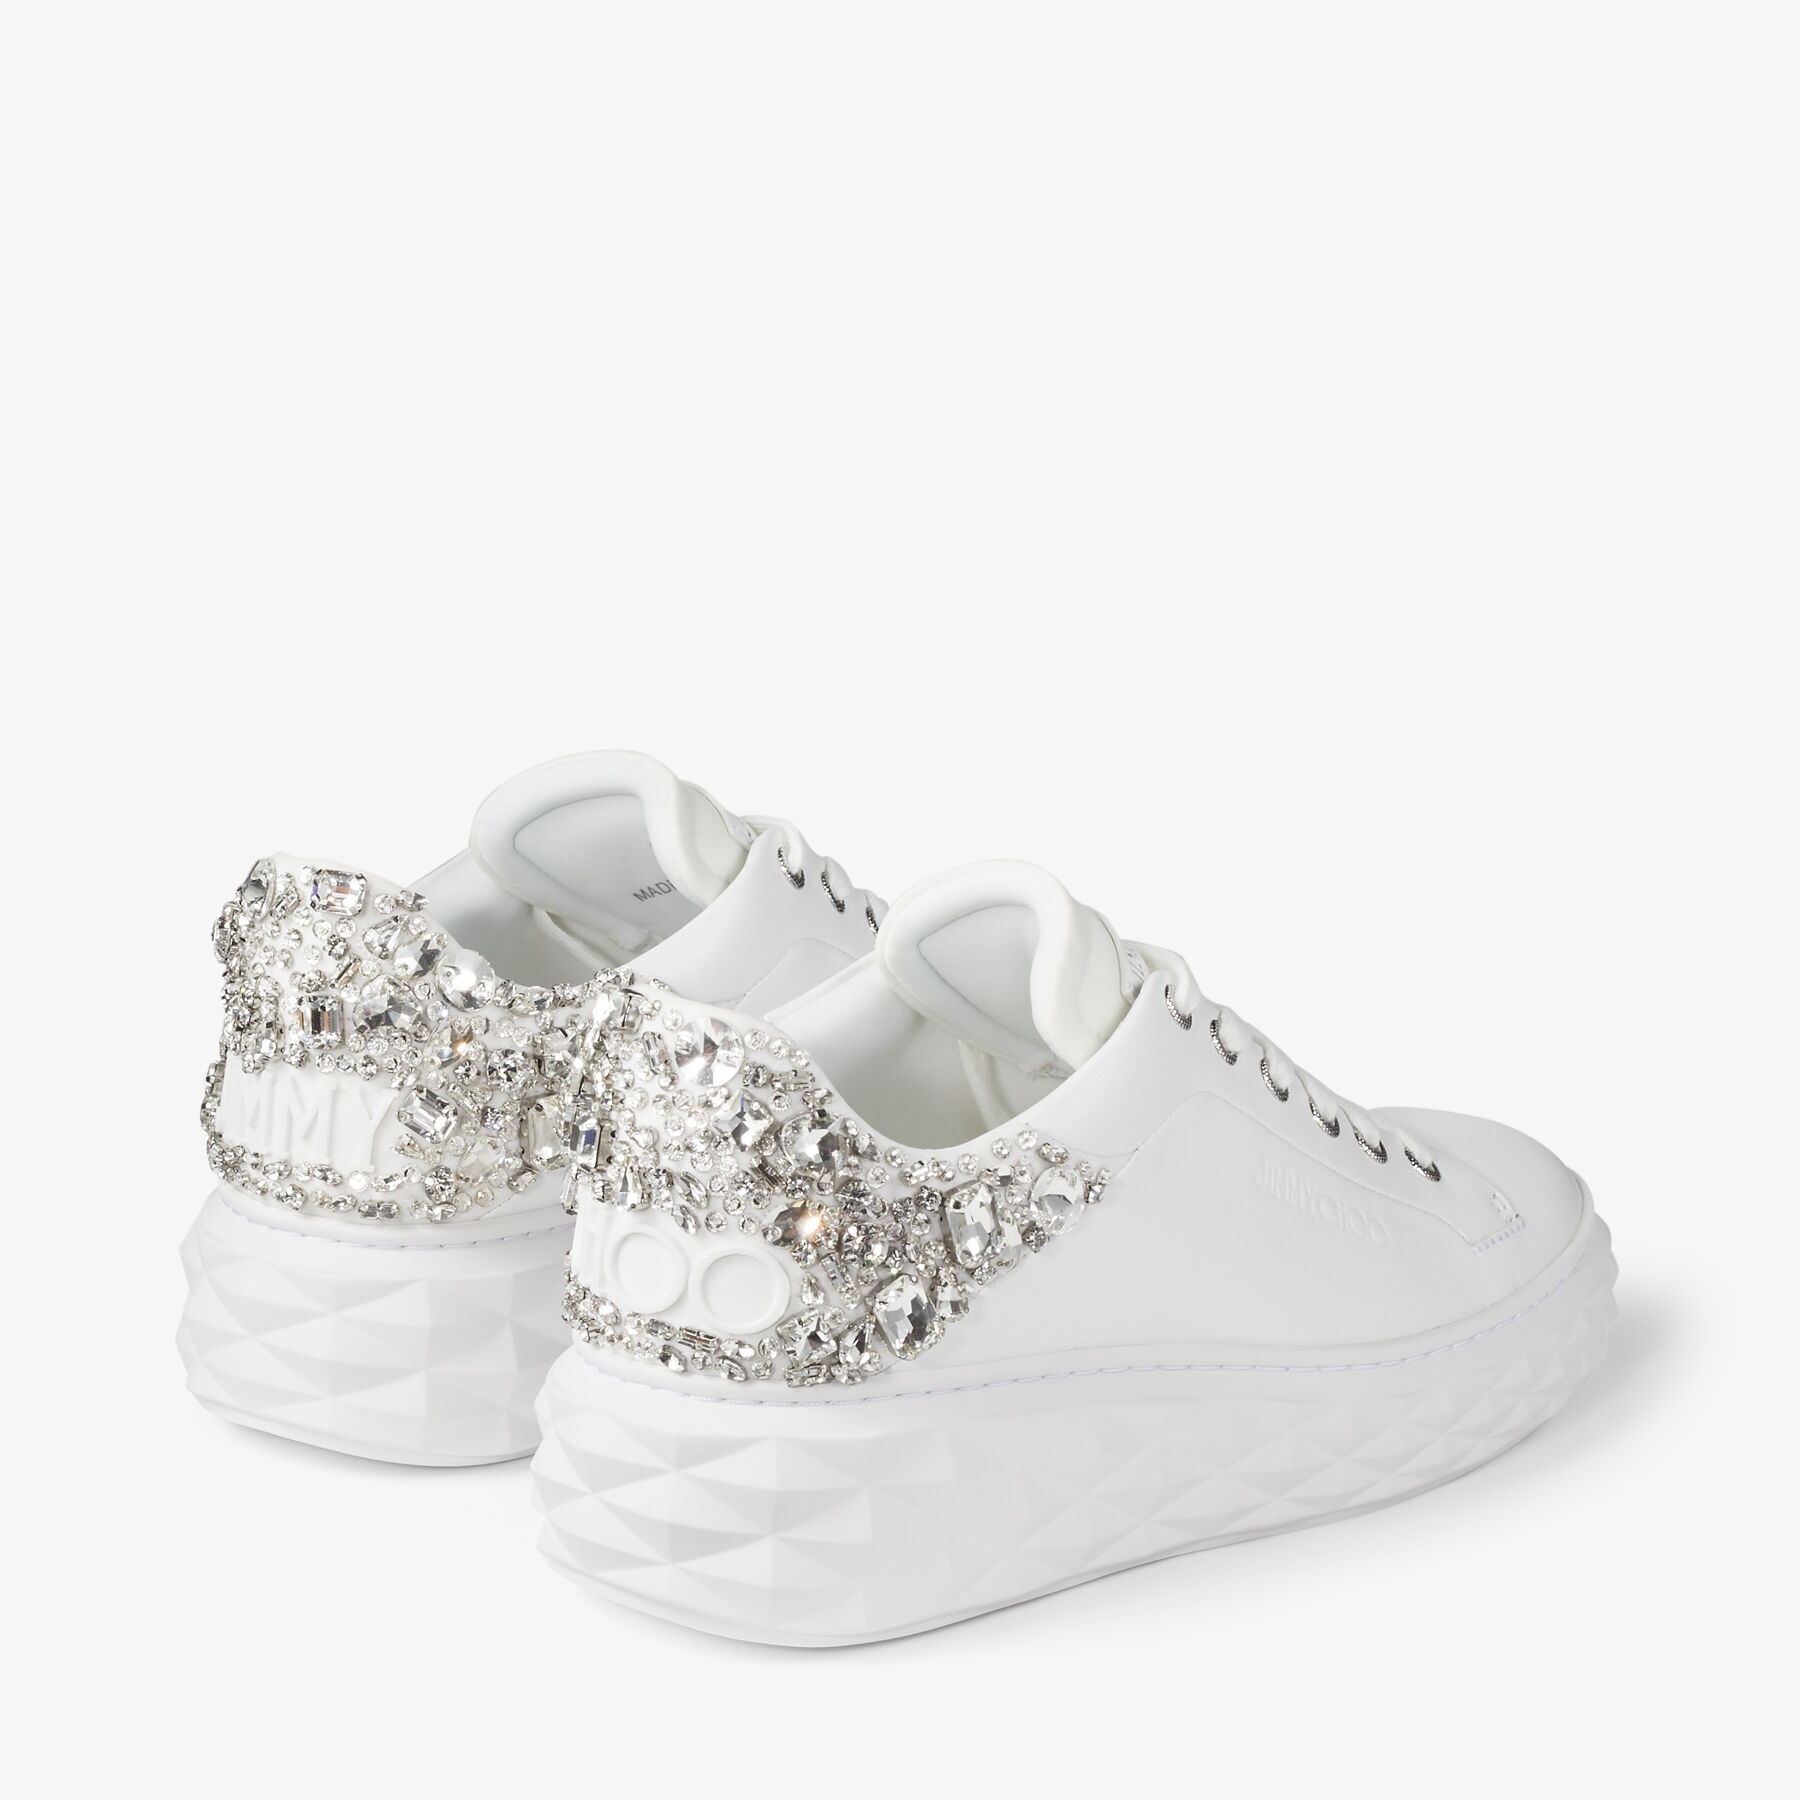 Diamond Maxi/f Ii
White and Silver Nappa Leather Trainers with Crystals - 7